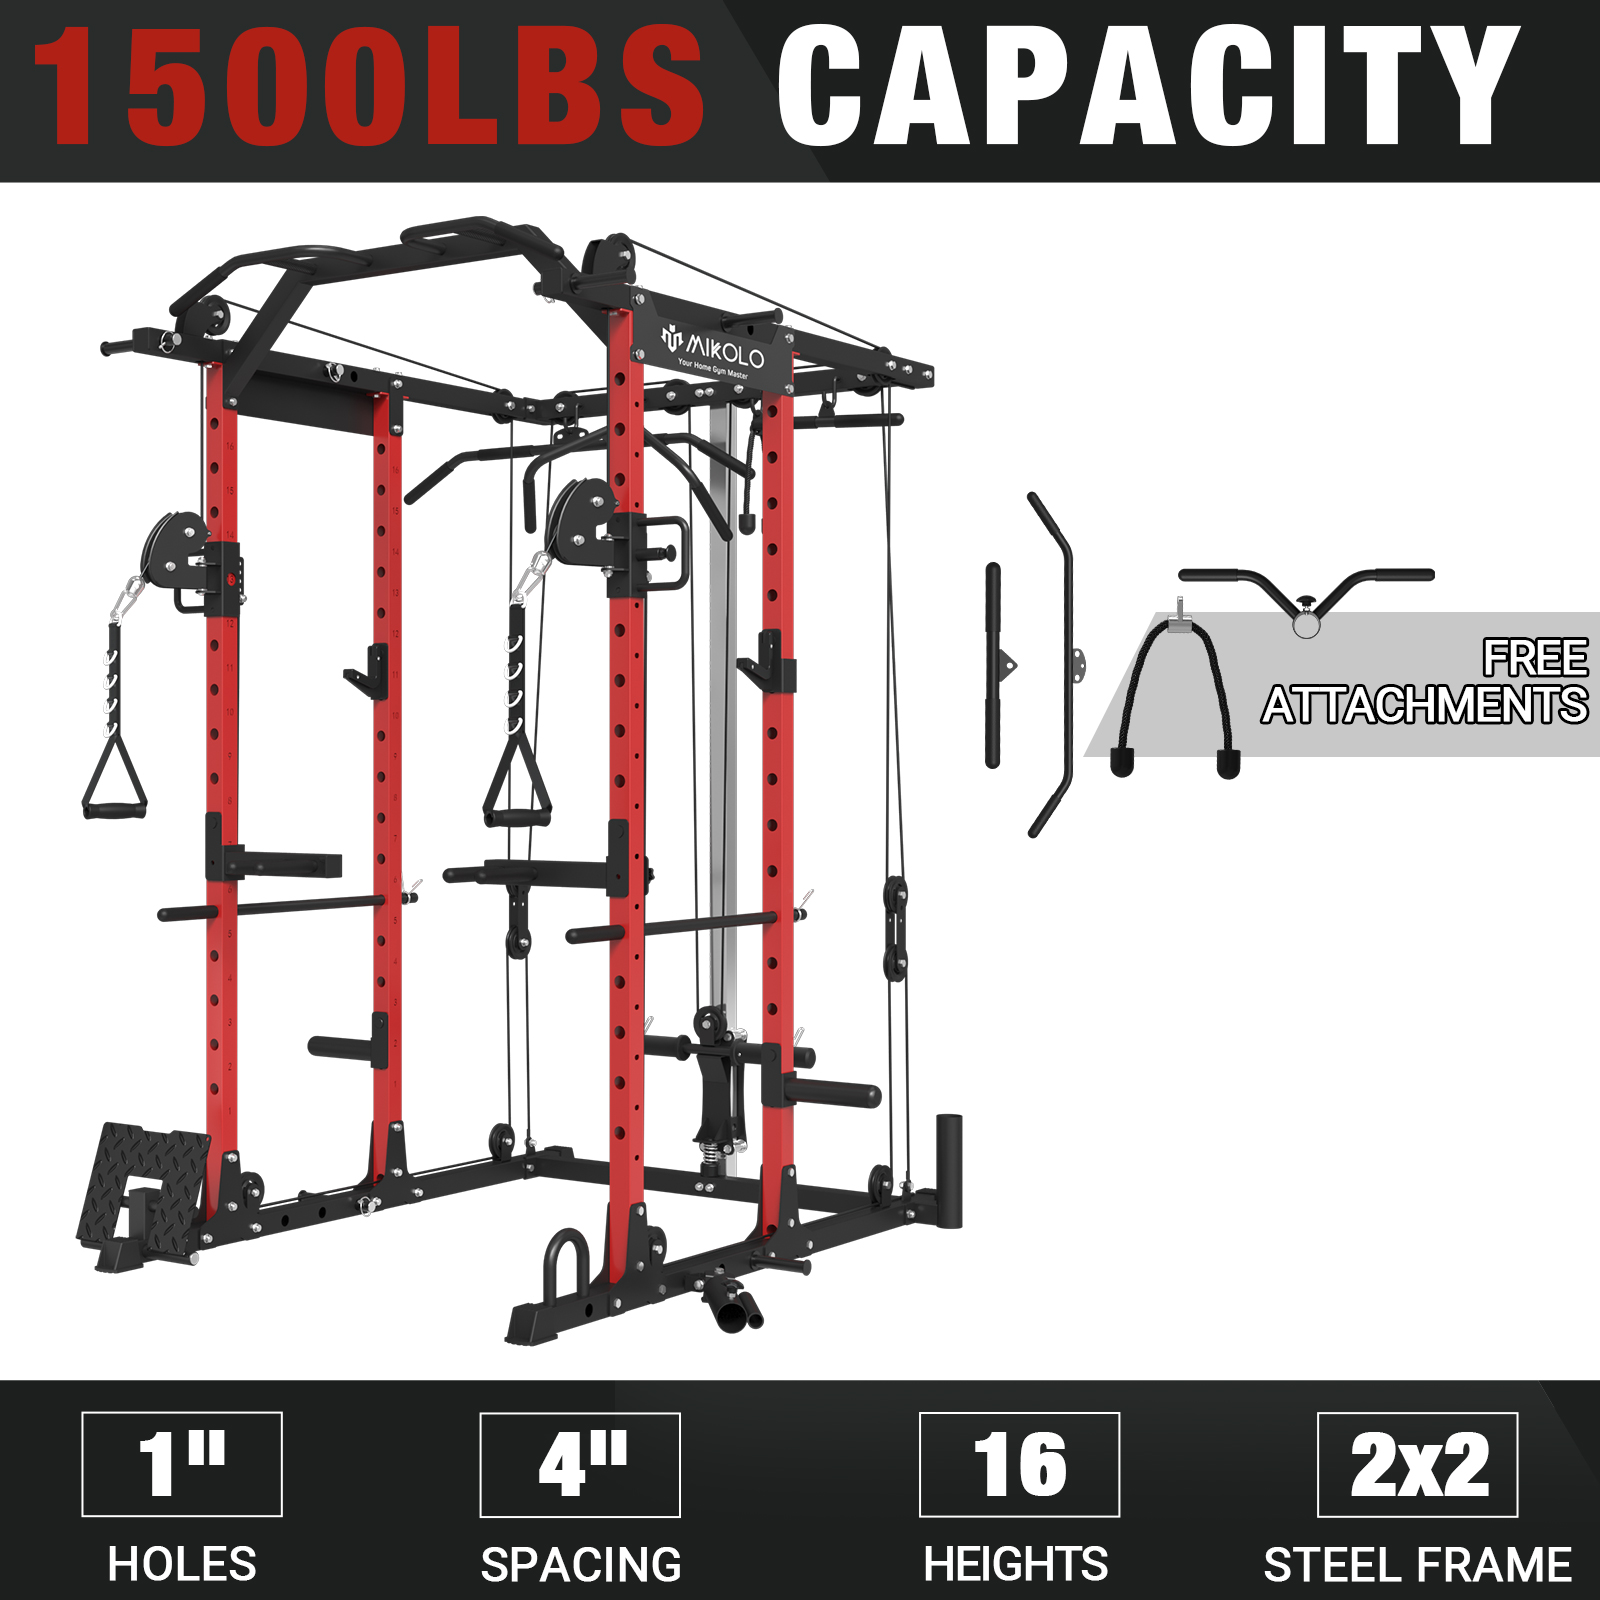 Mikolo Power Rack Cage, 1500 lbs Weight Rack with Cable Crossover Machine,Multi-Function Squat Rack with J Hooks,Dip Bars and Landmine for Home Gym (Red), Plate Loaded Machine - image 1 of 9